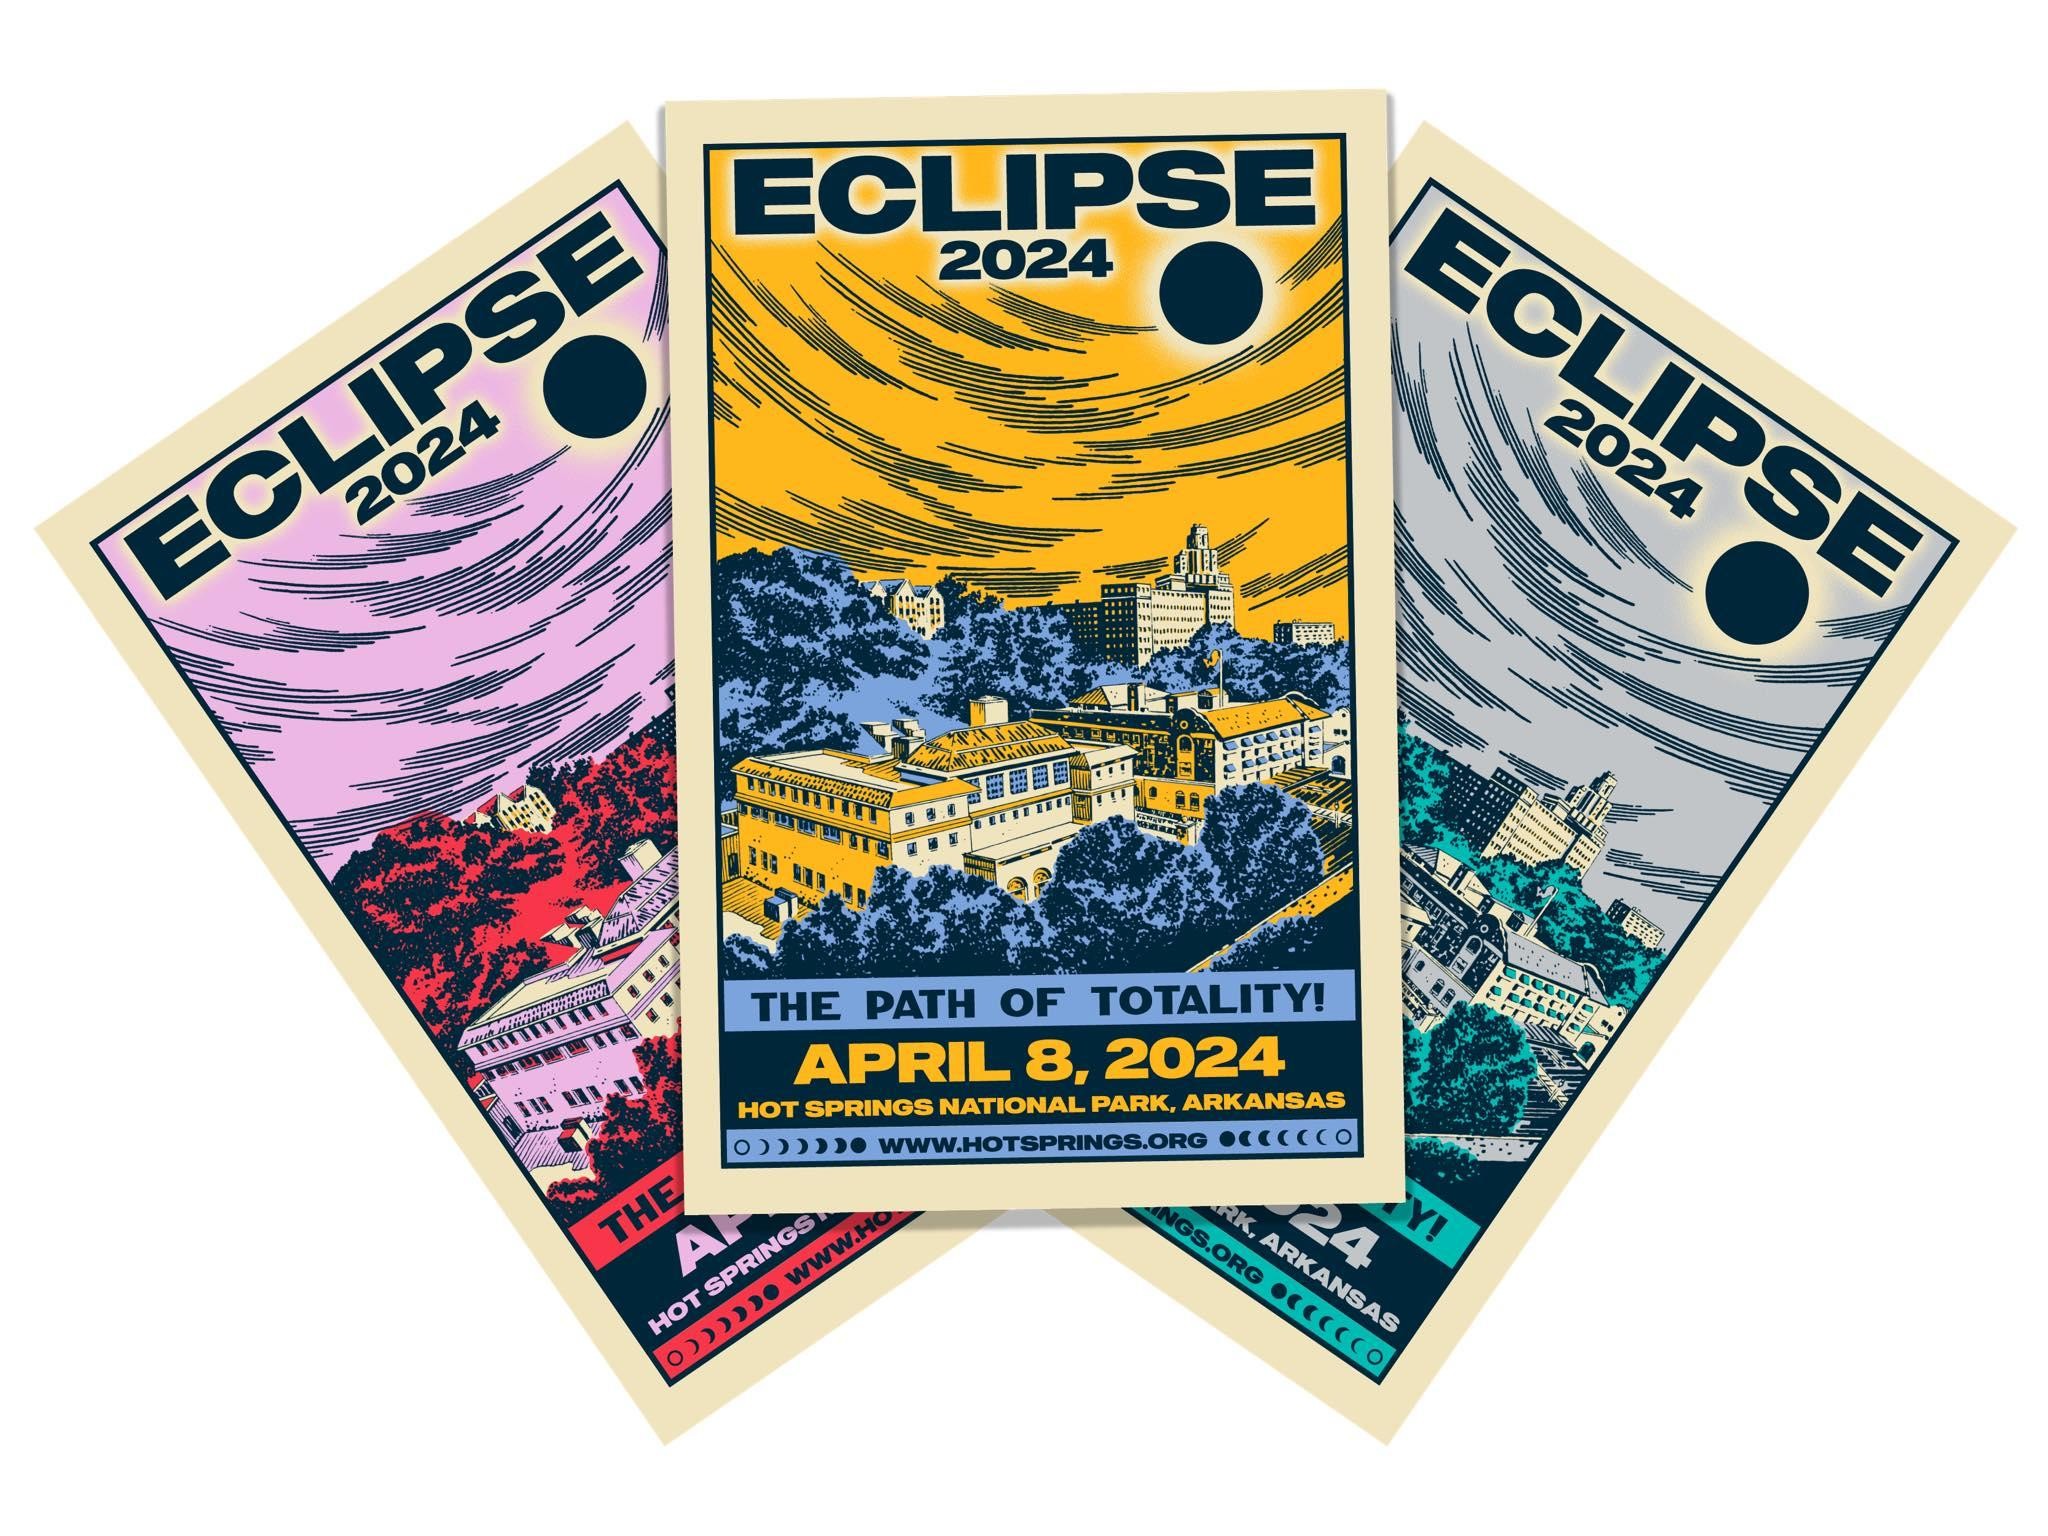 Eclipse 2024 Hot Springs Posters, Set of 3